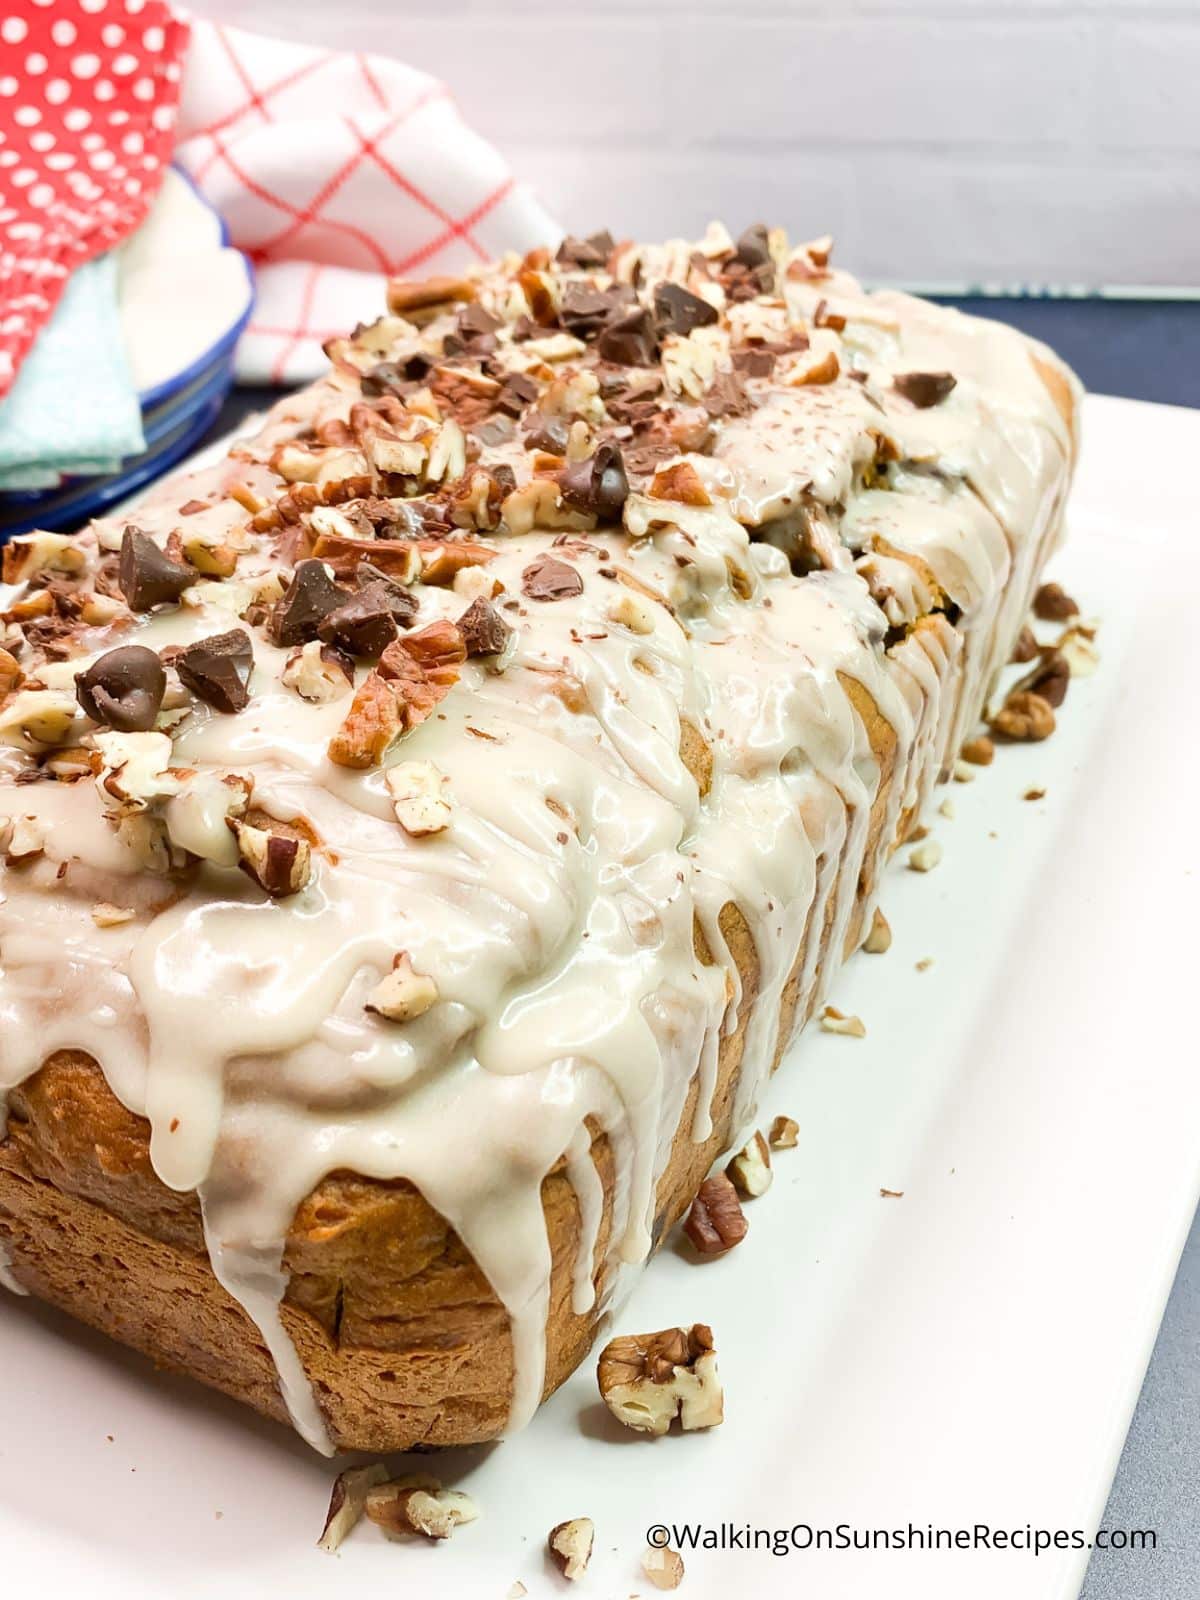 Cake Mix Pumpkin Bread with chopped pecans, chocolate chips and maple sugar glaze.